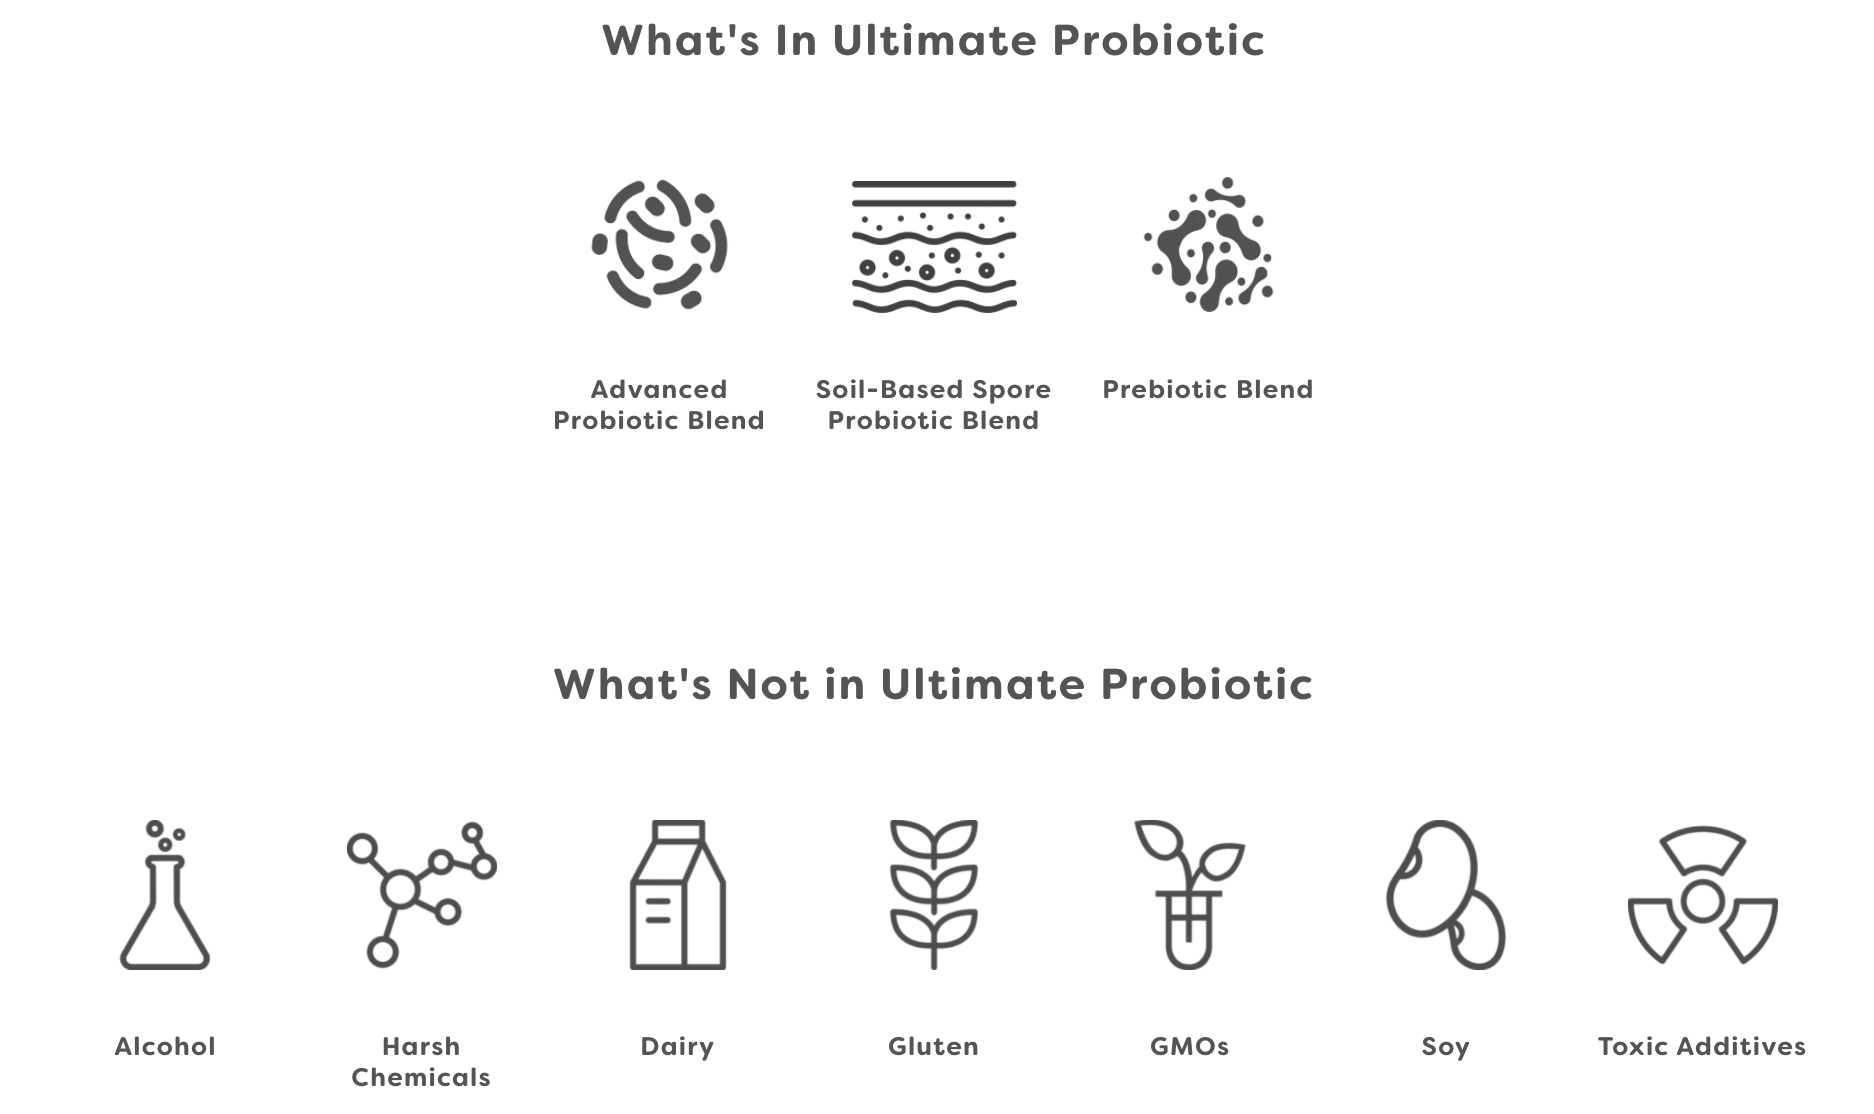 What's in Ultimate Probiotic